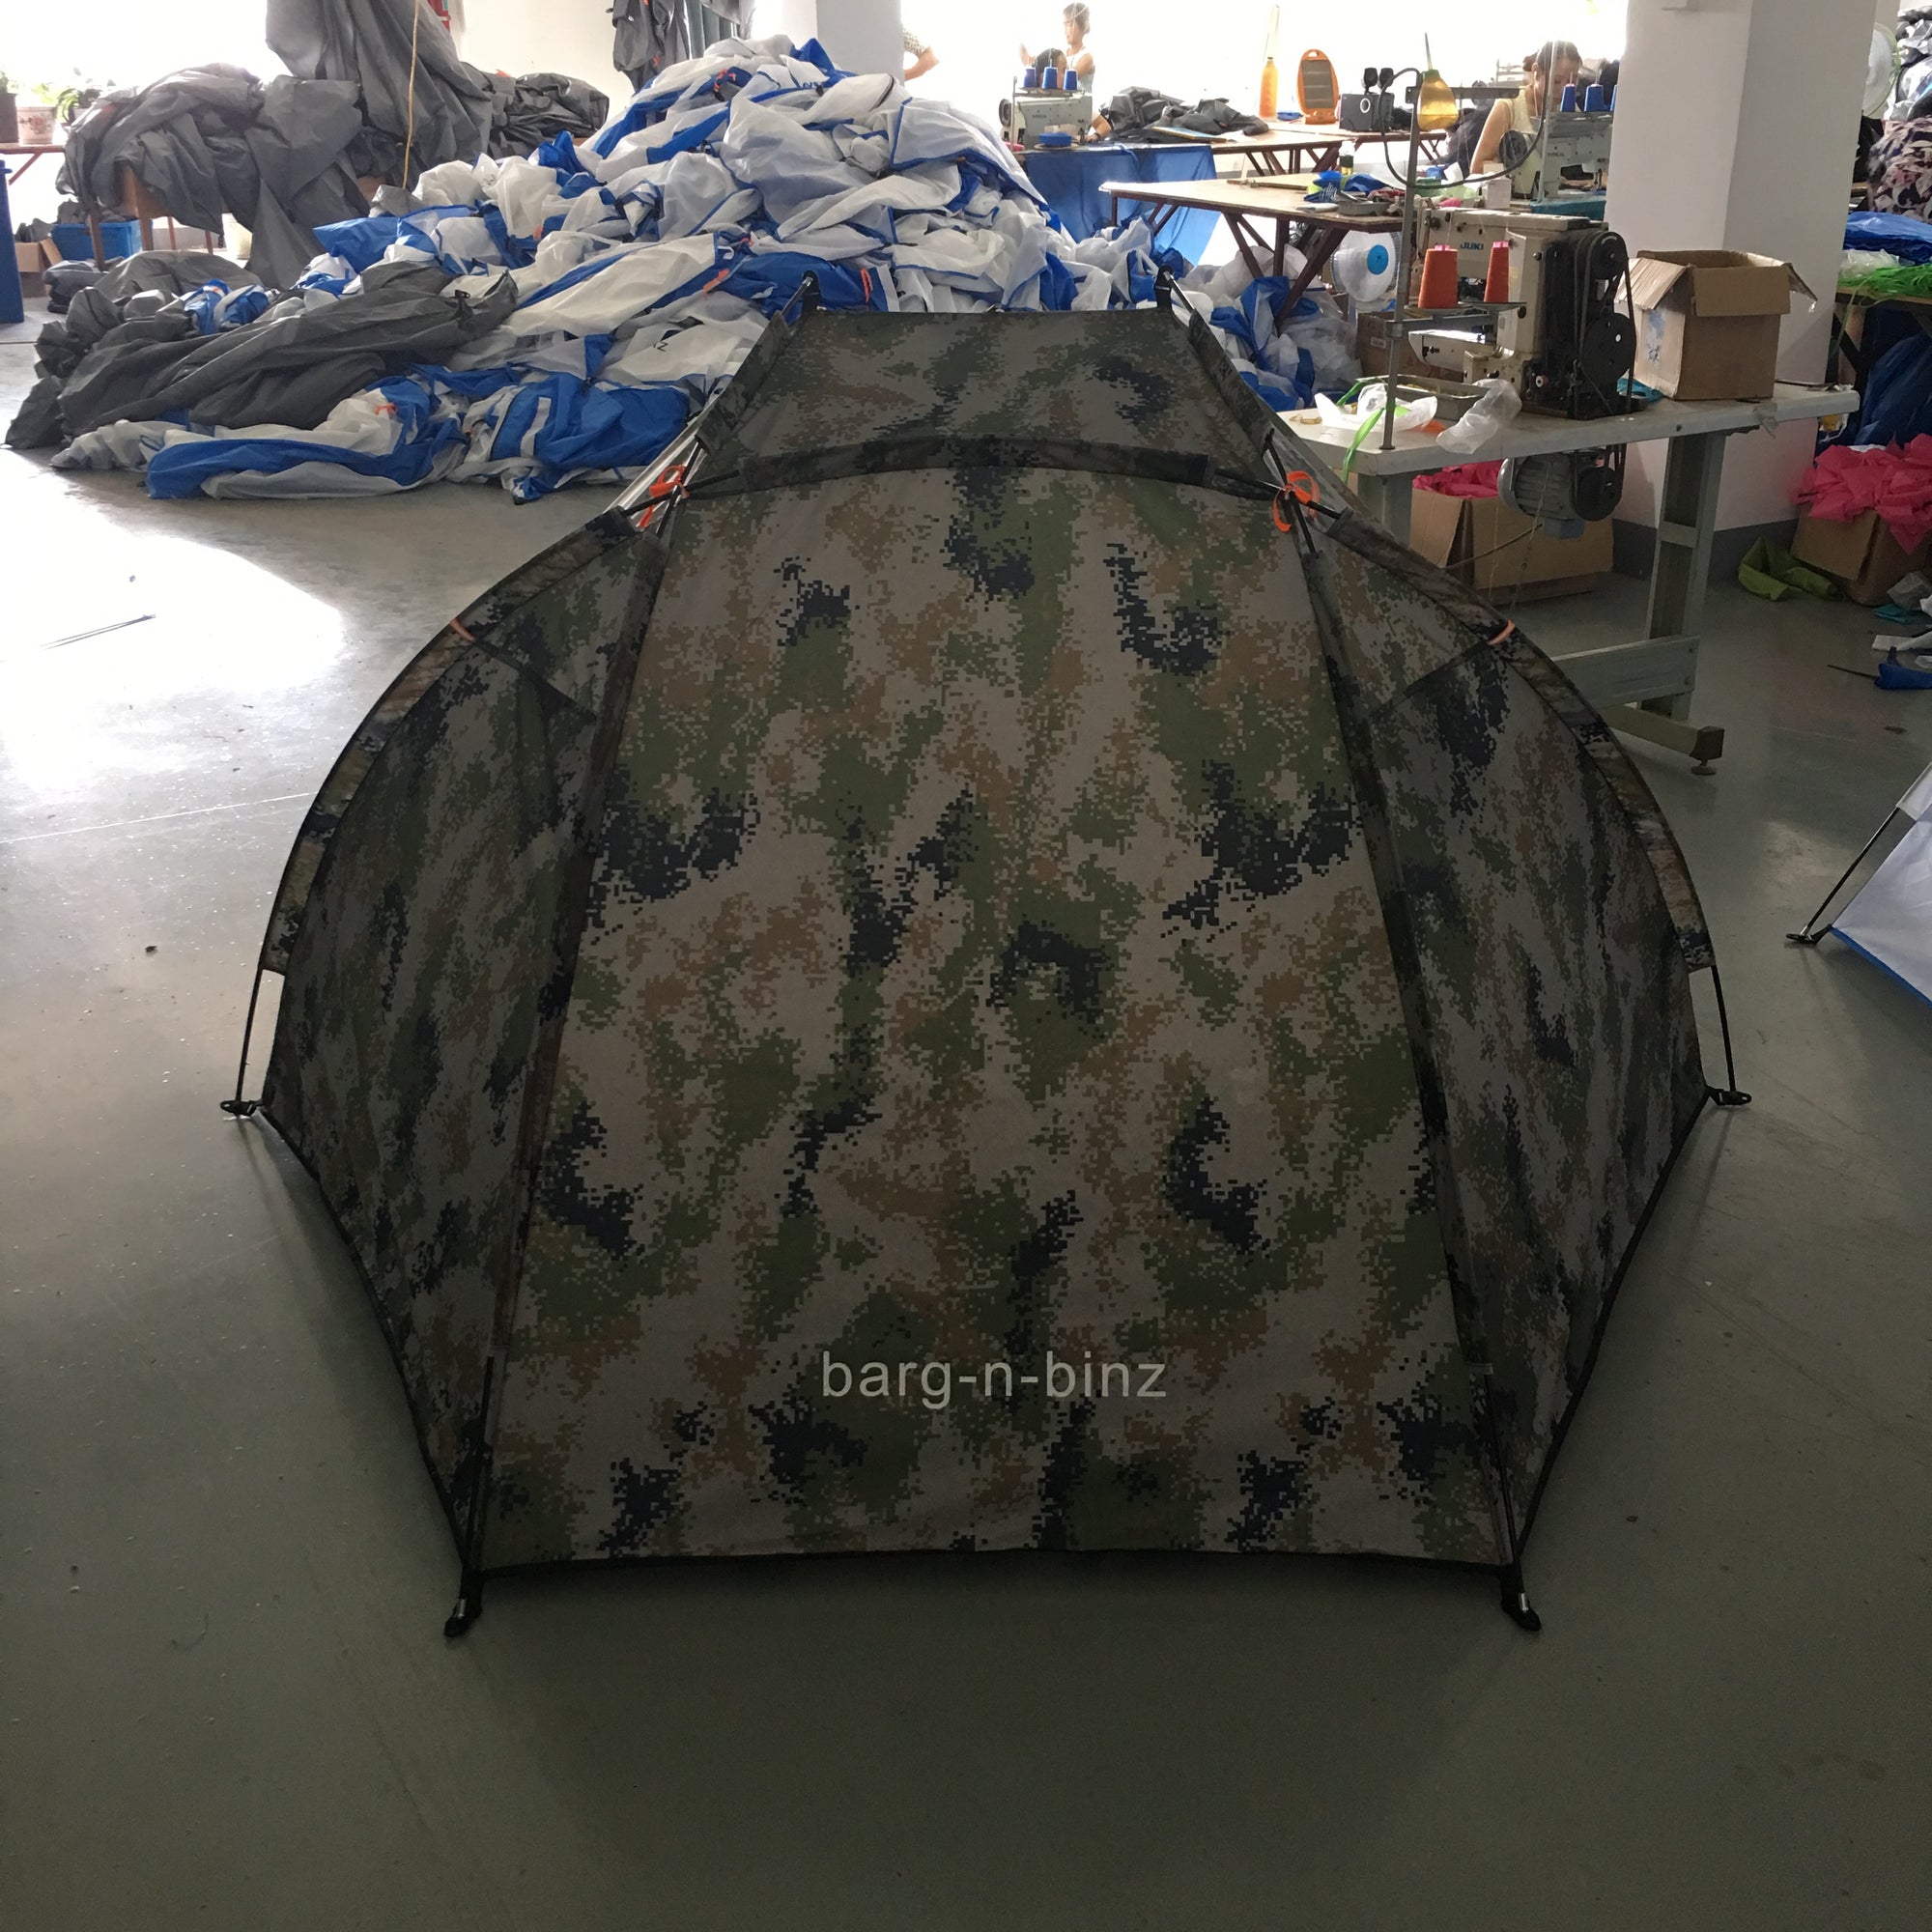 Hot Selling 2 Person Instant Pop Up Fishing Tent,Camouflage Beach